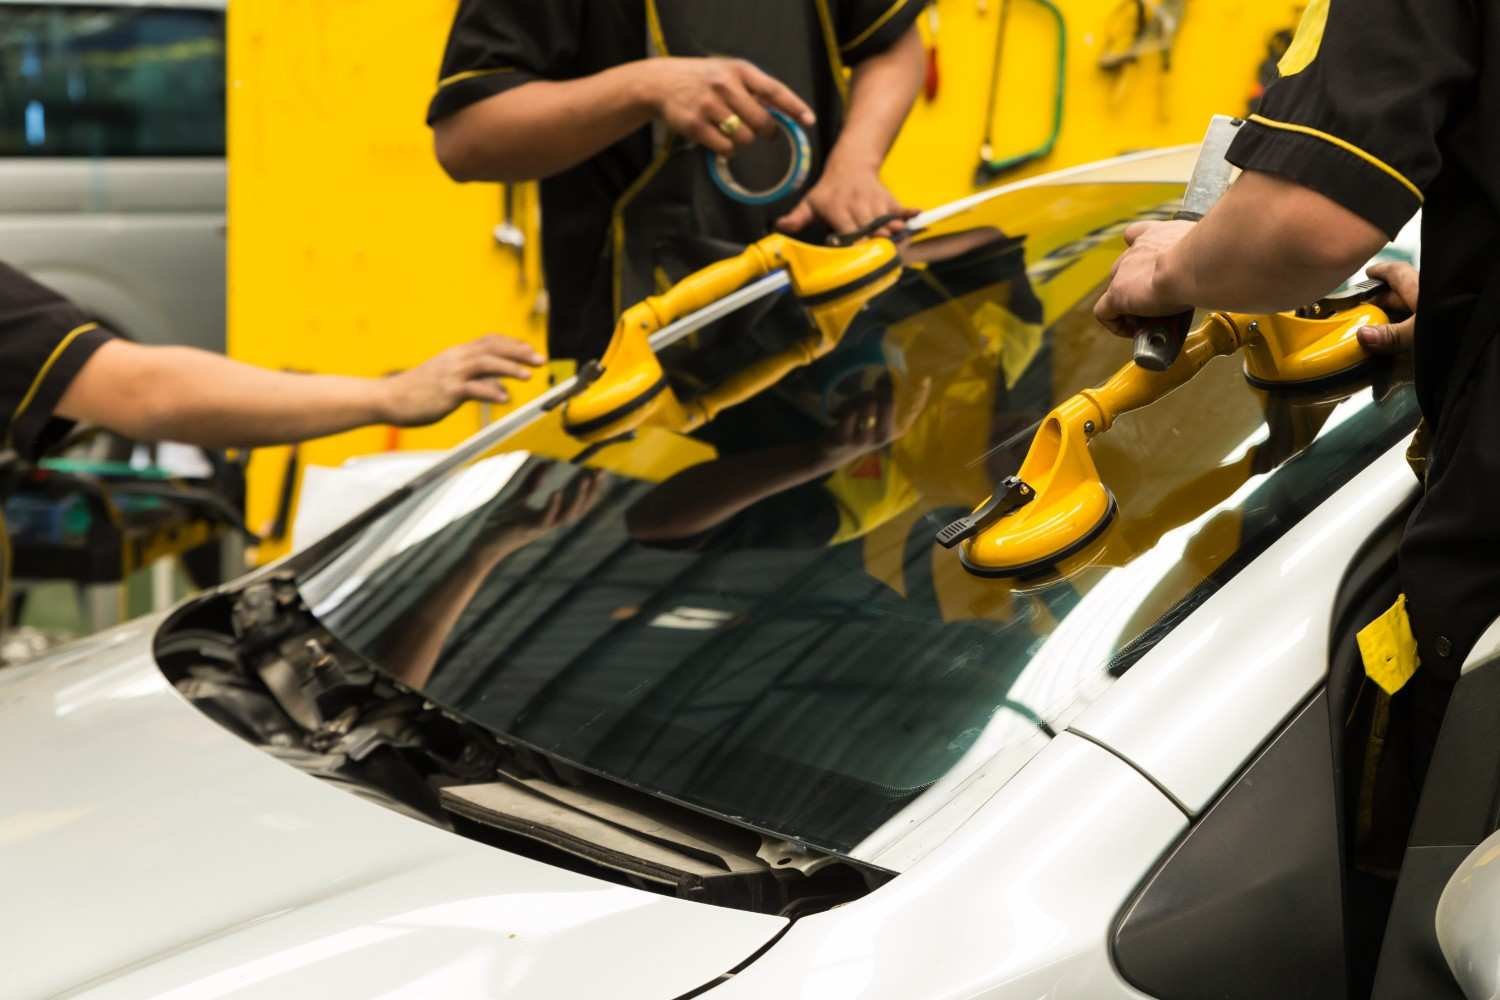 DIY or Professional? Making the Right Choice for Auto Glass Repairs